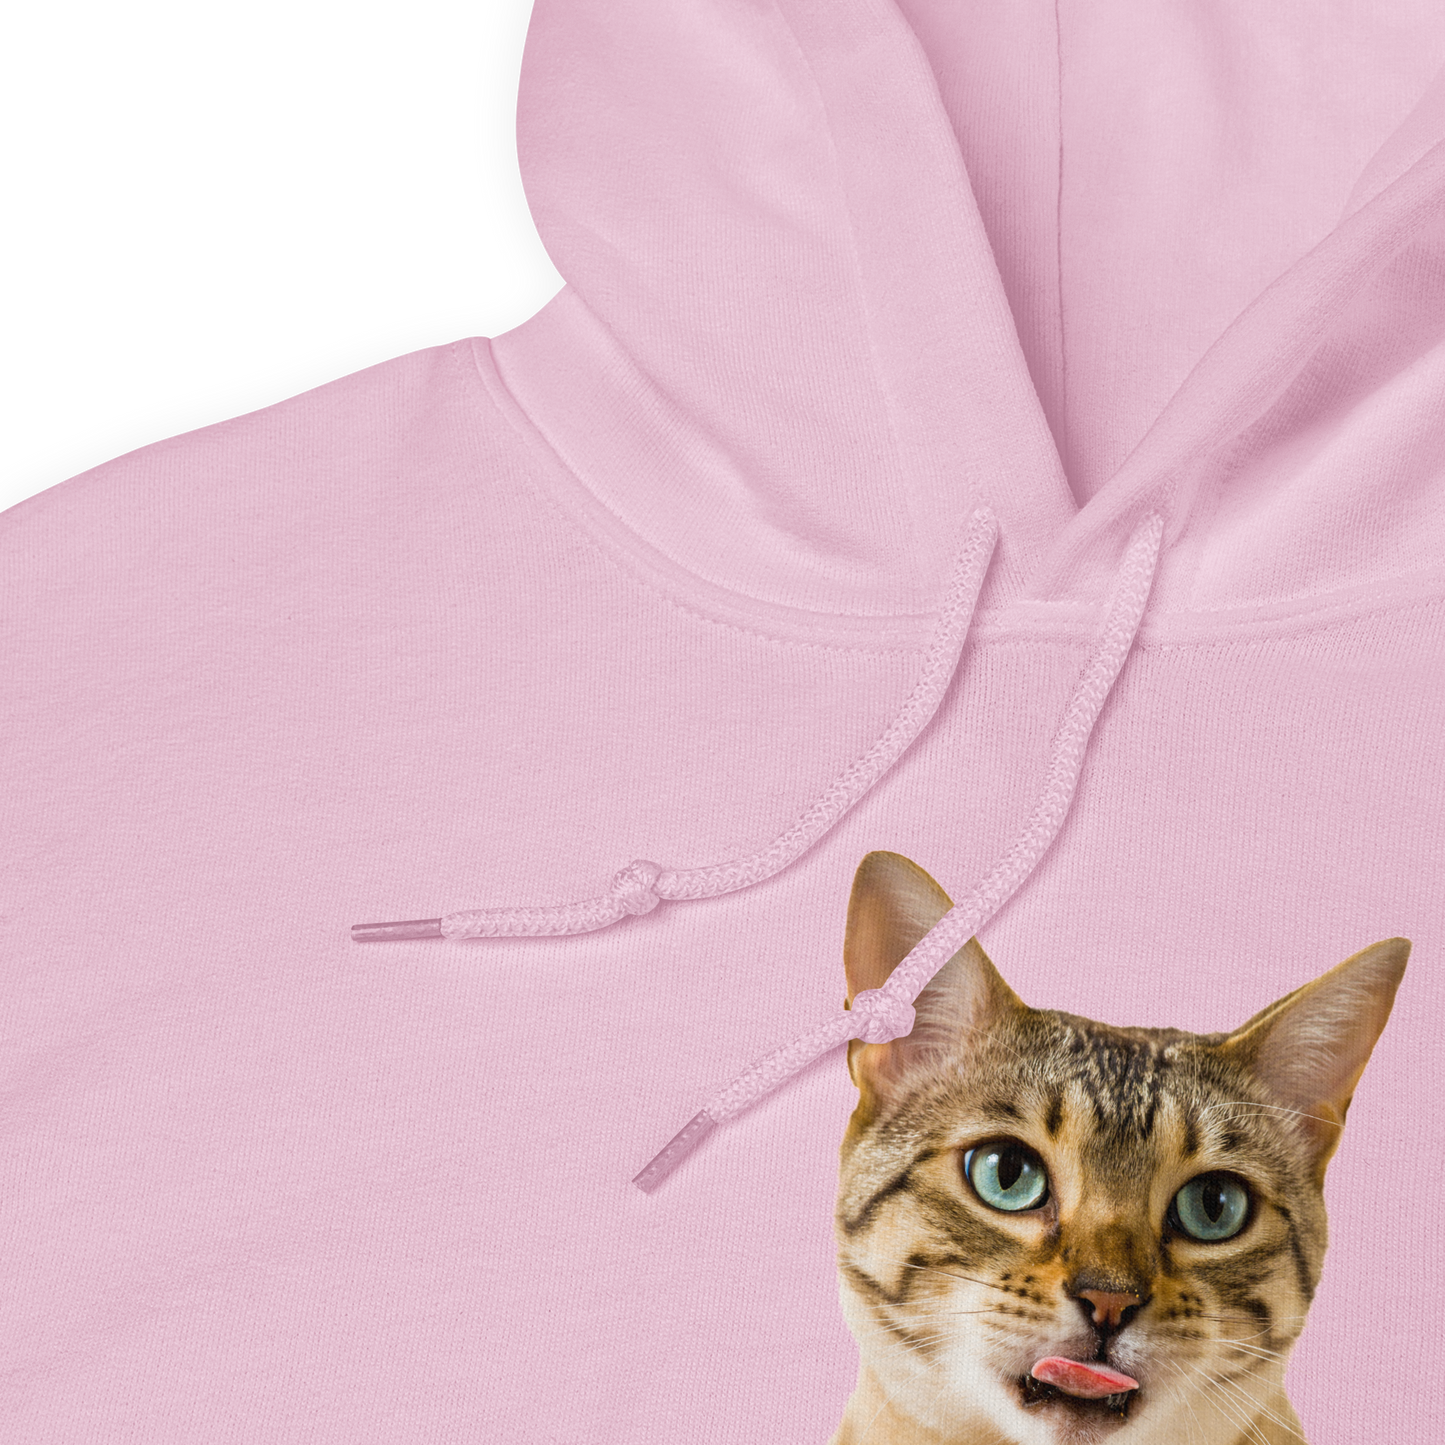 Front Details of a Light Pink Cat Hoodie featuring an adorable Purrfect graphic on the chest - Funny Graphic Cat Hoodies - Boozy Fox